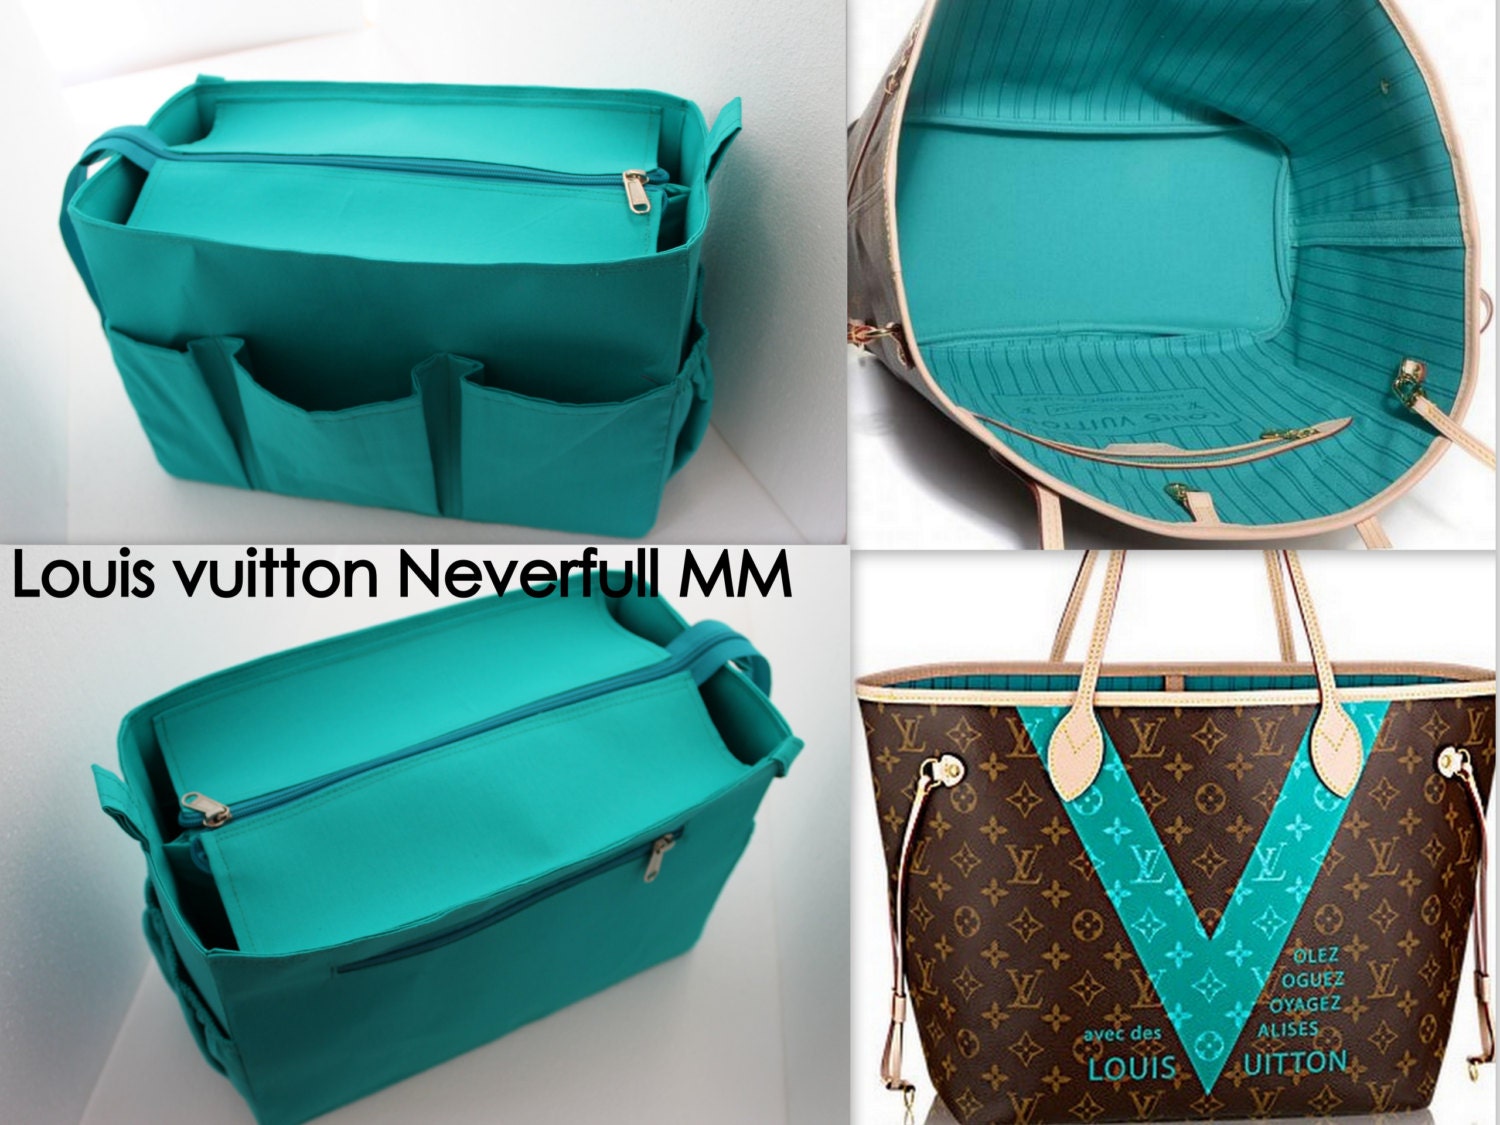 Louis Vuitton Neverfull Organizer Insert, Bag Organizer with Middle  Compartment and Exterior Pockets